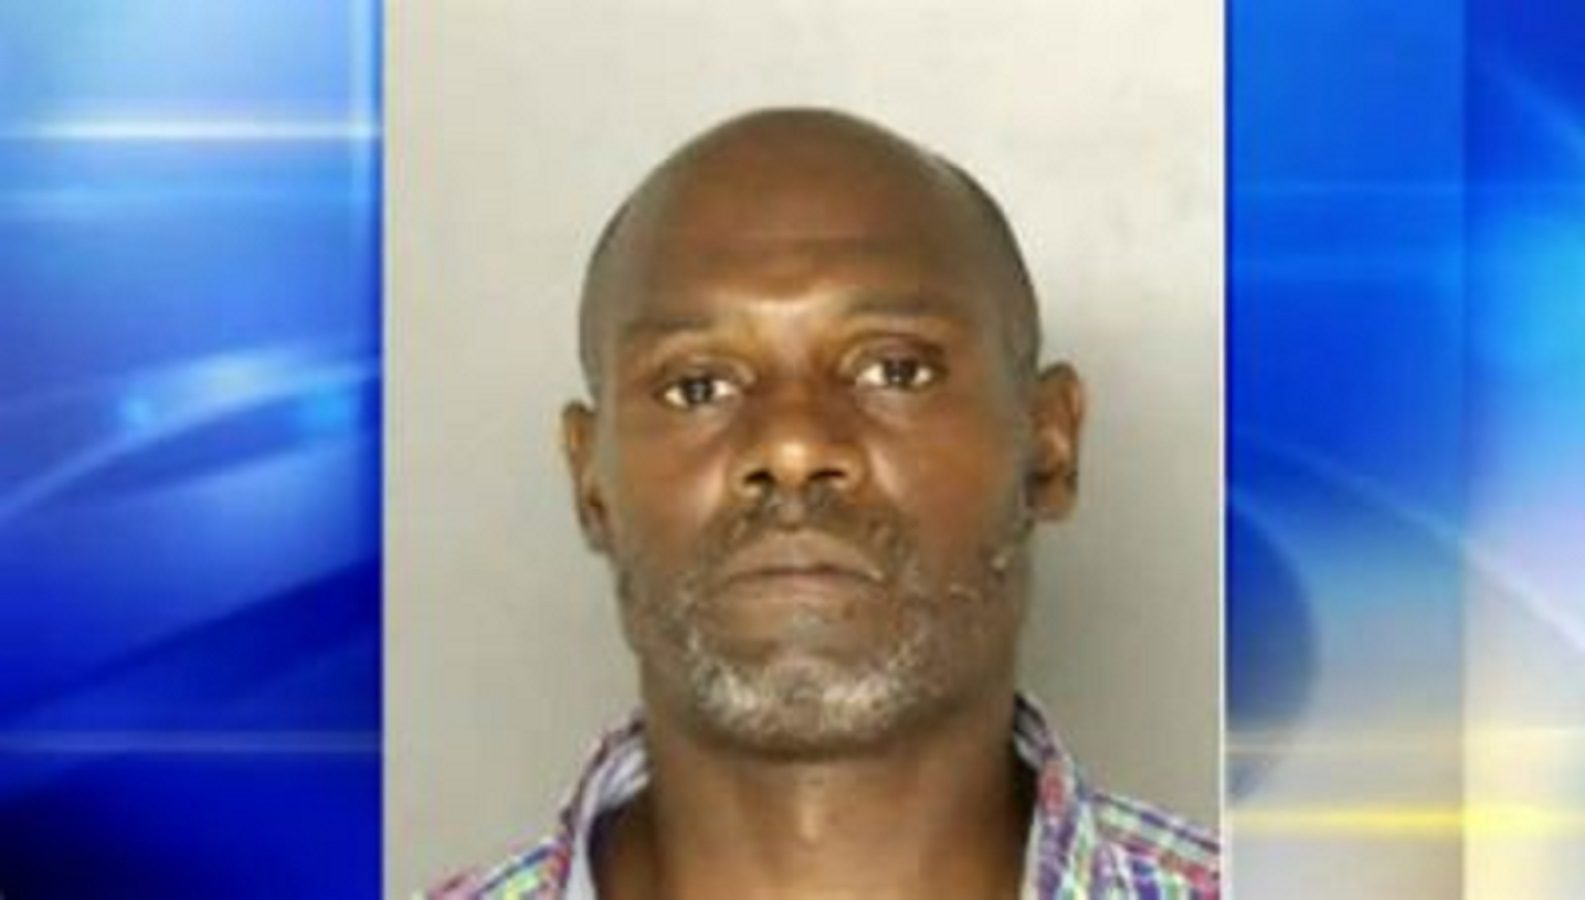 Racist Black Man Stabs 12-Year-Old Boy in the Neck at McDonald's While Ranting About 'White Devils' | The Gateway Pundit | by Cassandra MacDonald